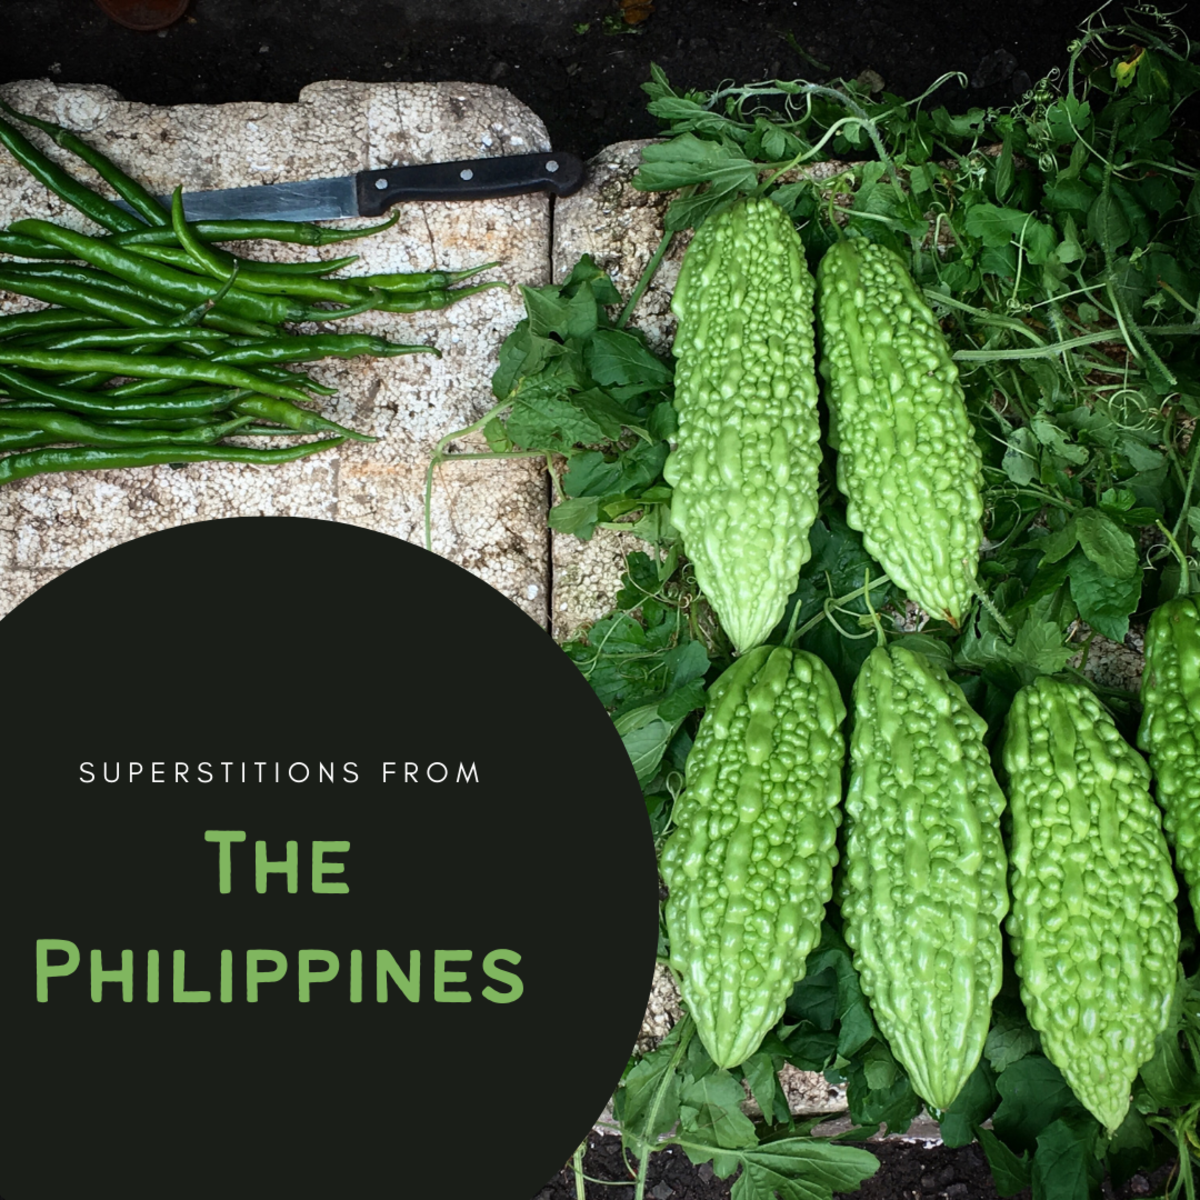 There are a number of popular superstitions in the Philippines!